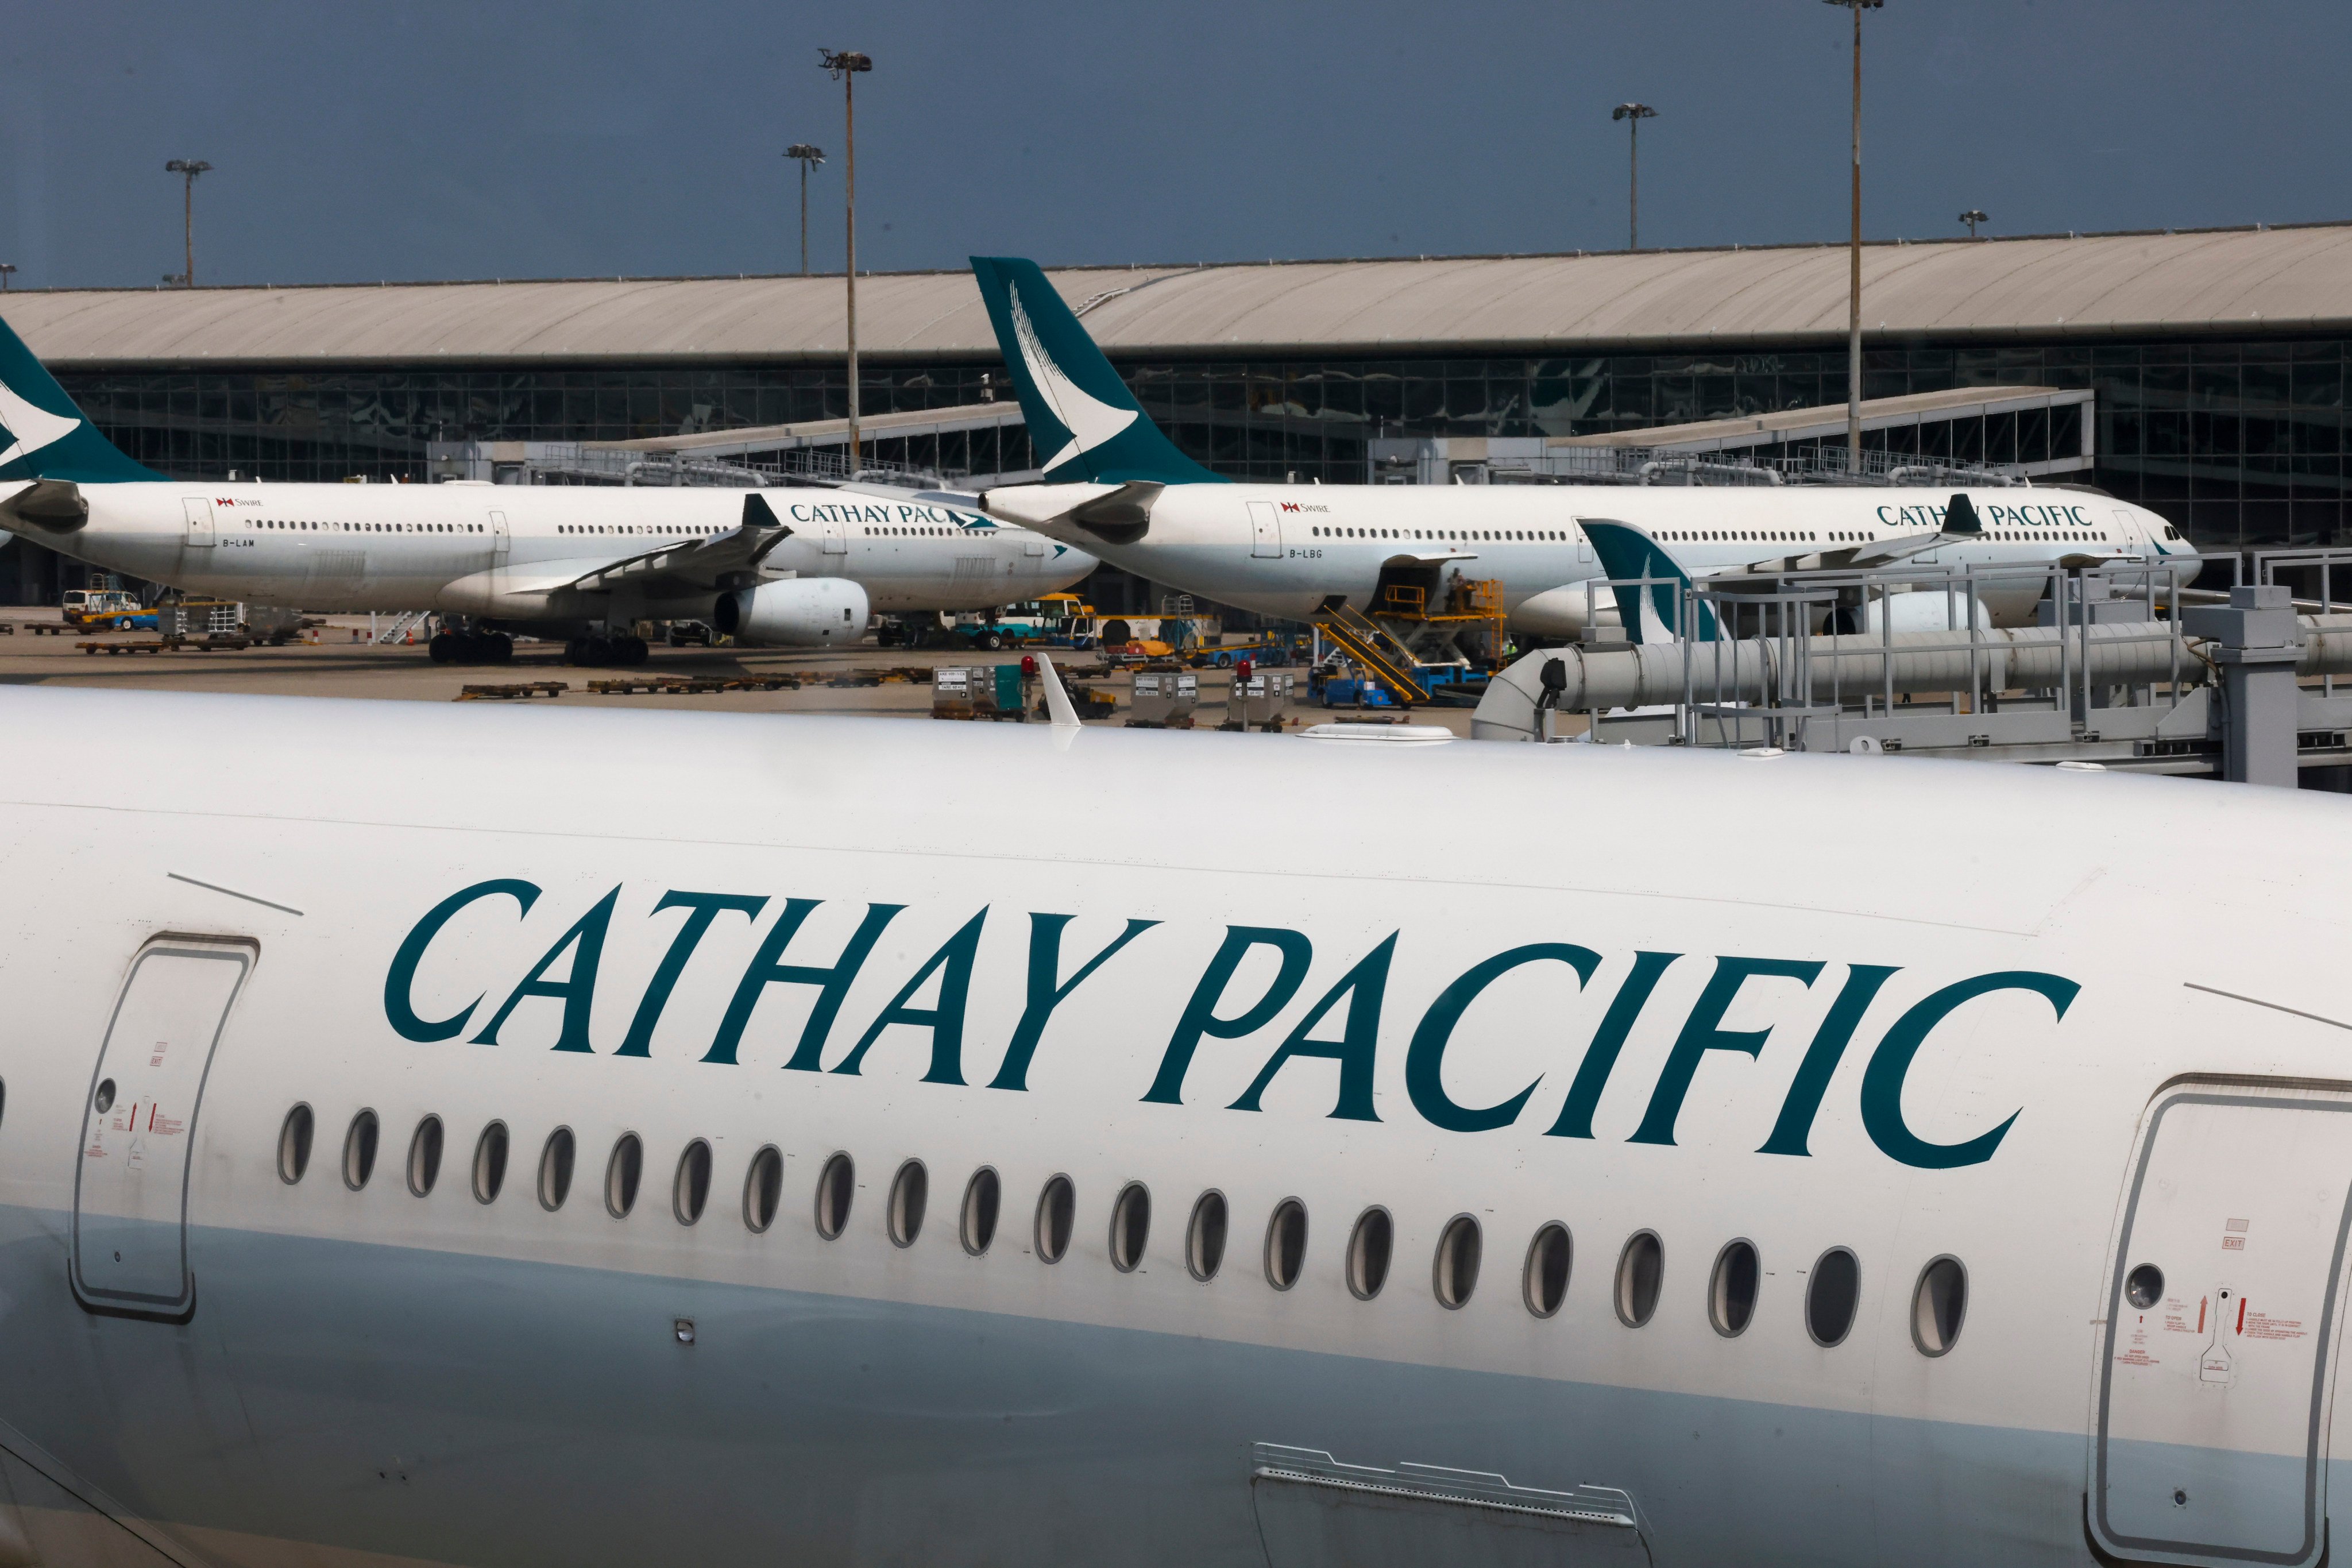 Cathay Pacific says people can join the latest race for tickets until July 2. Photo:  Jonathan Wong